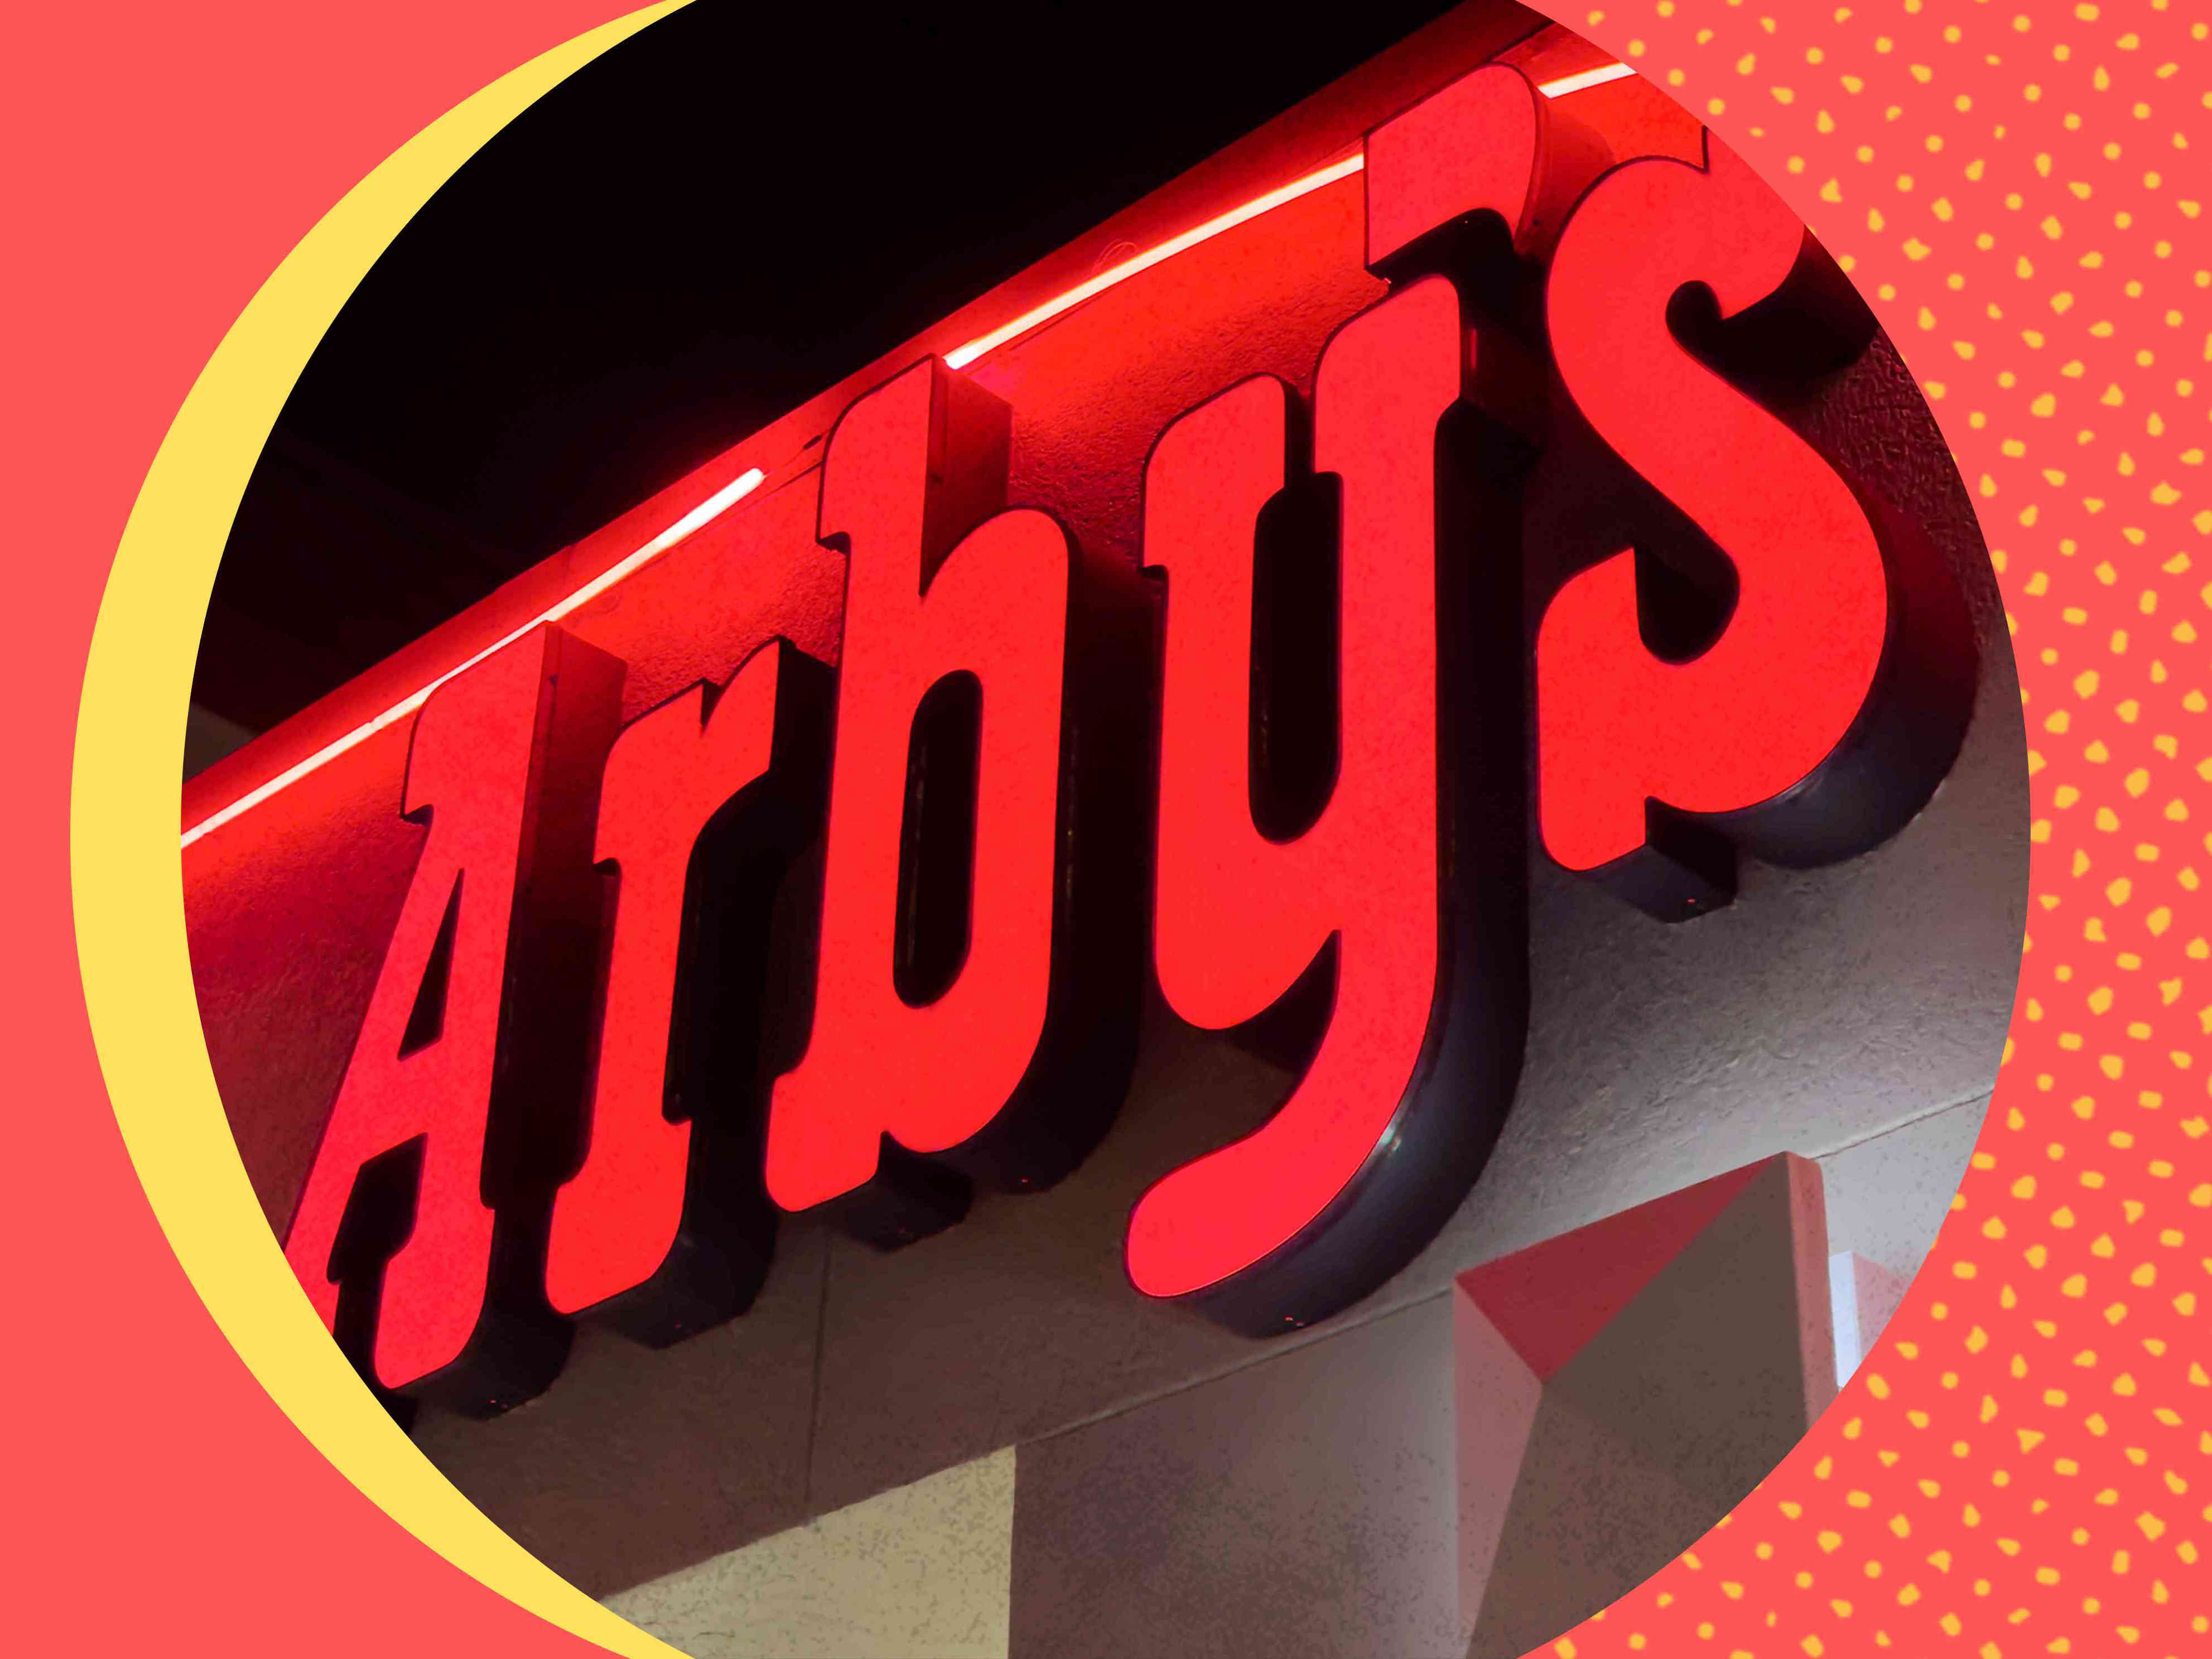 arby’s just launched 3 new menu items and brought back a fan fave